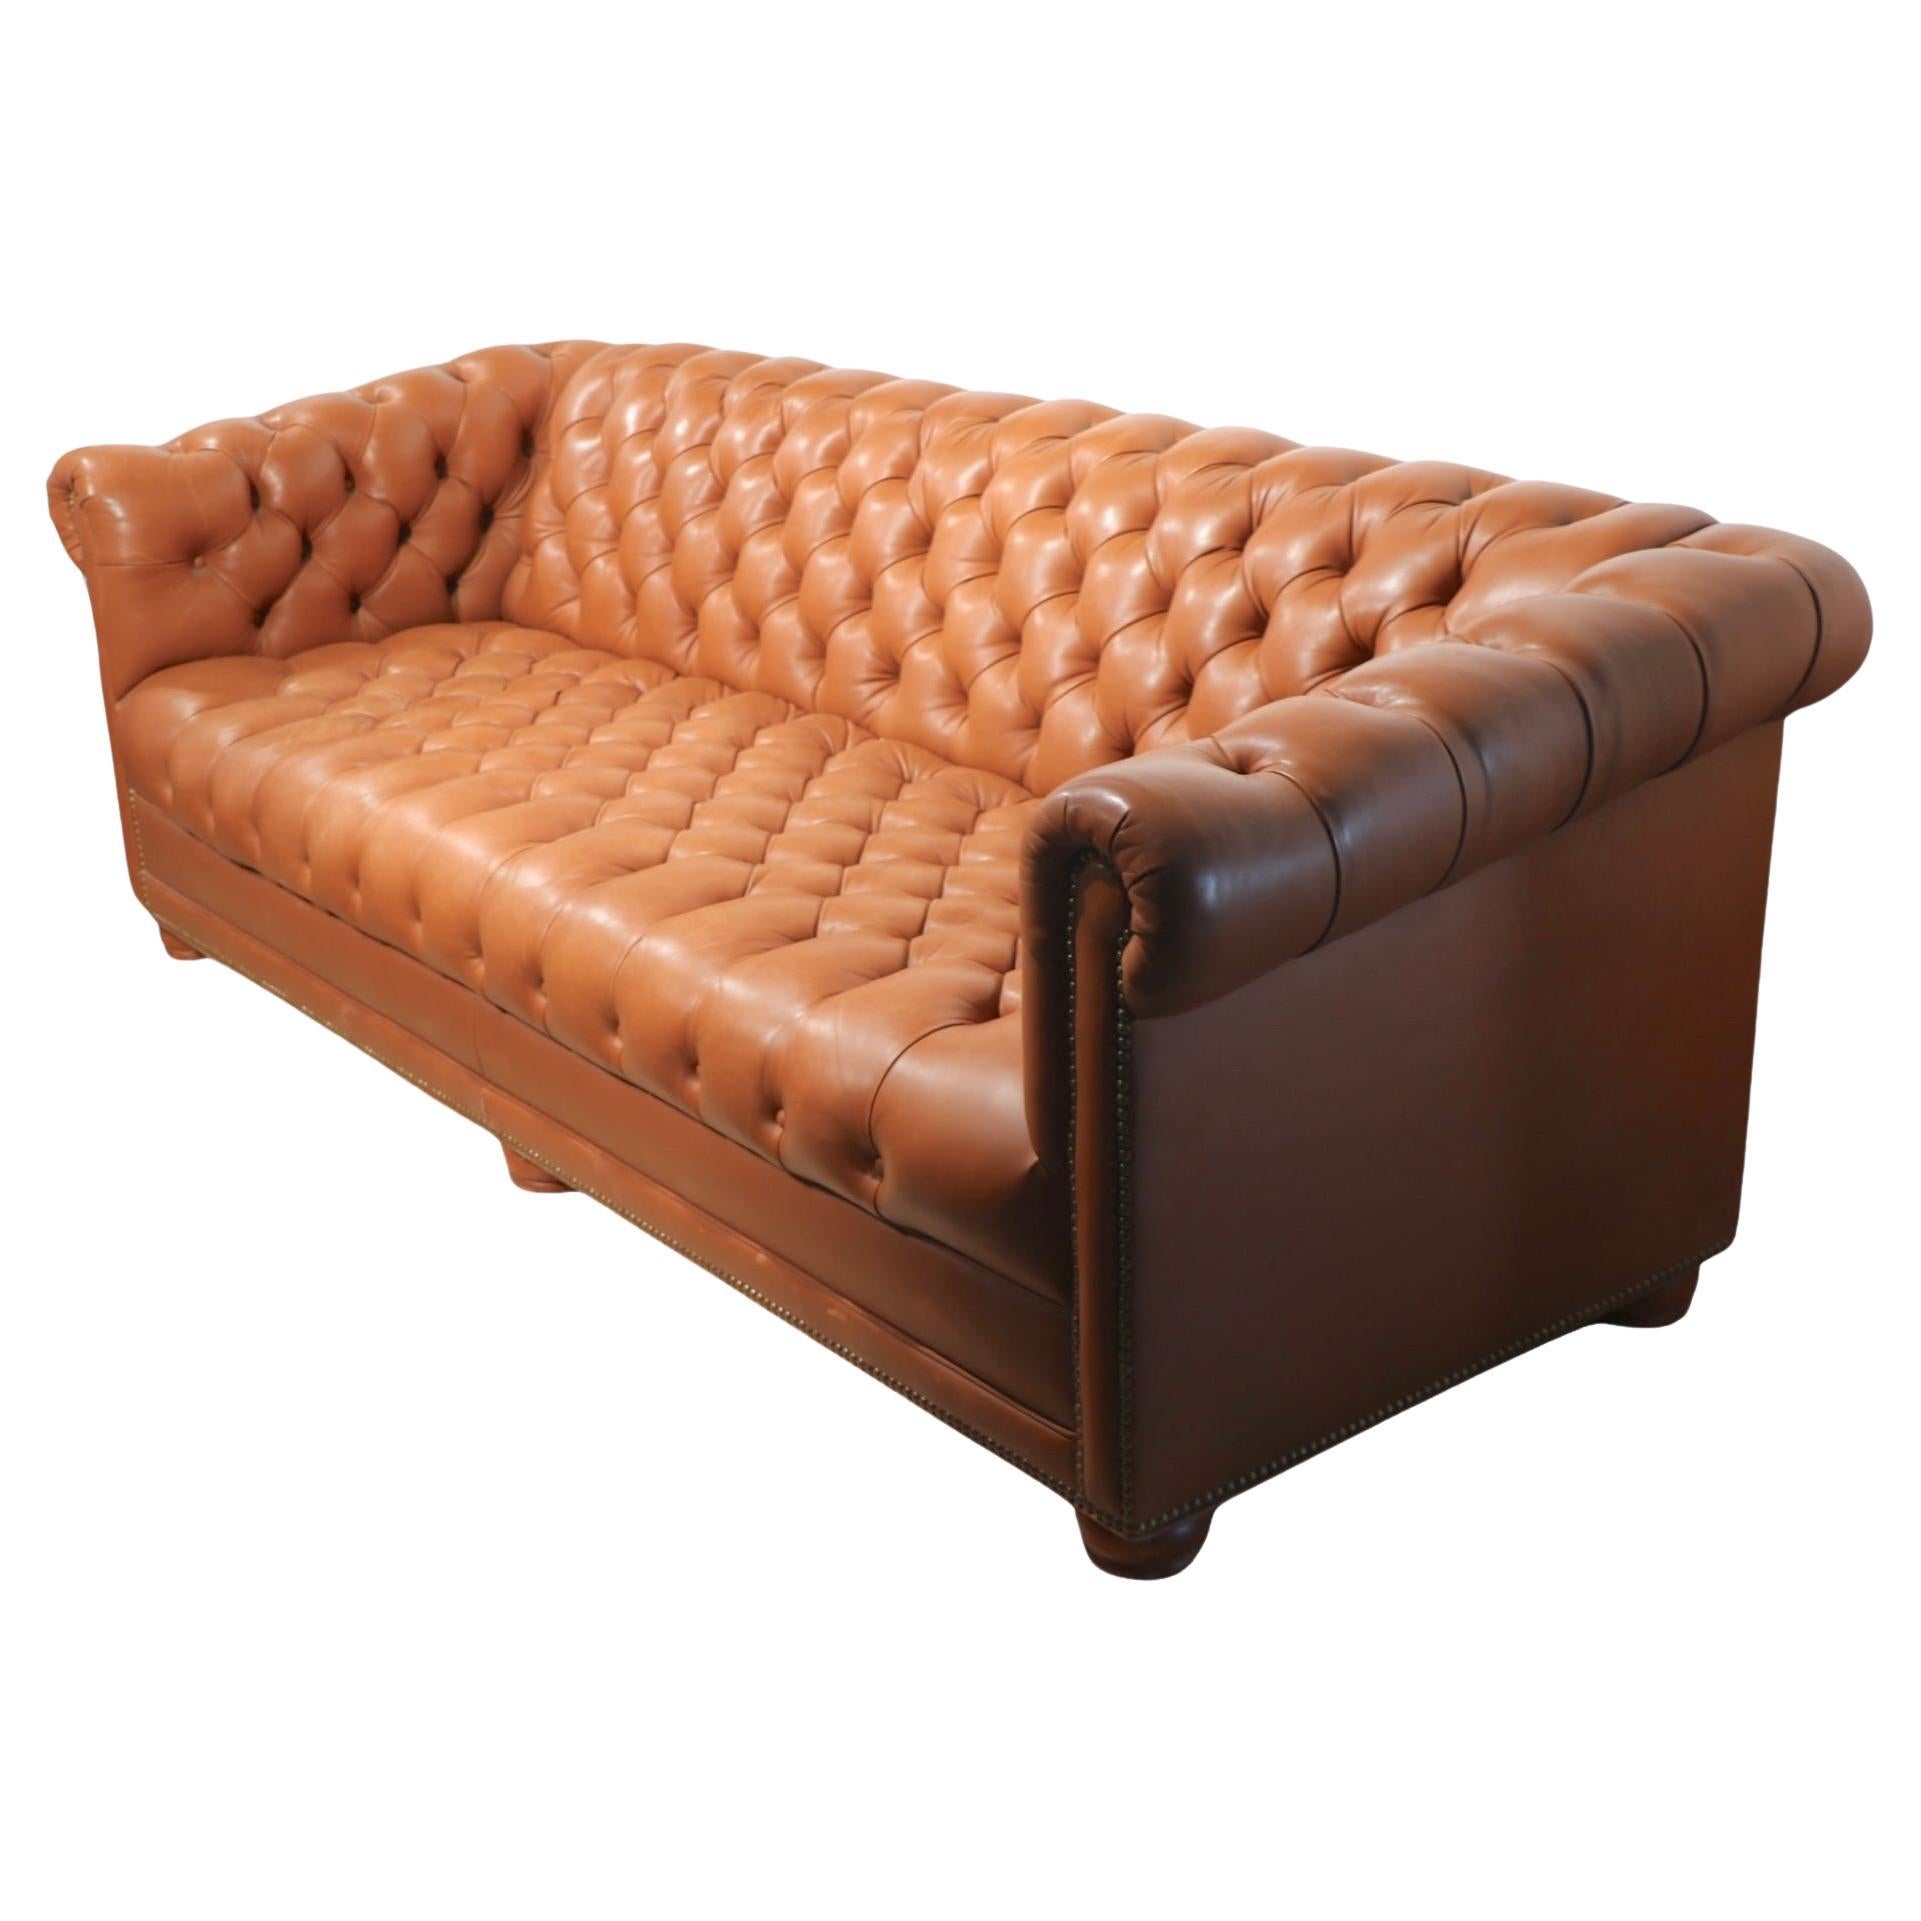 Large Leather Tufted Chesterfield Sofa by Cabot Wrenn